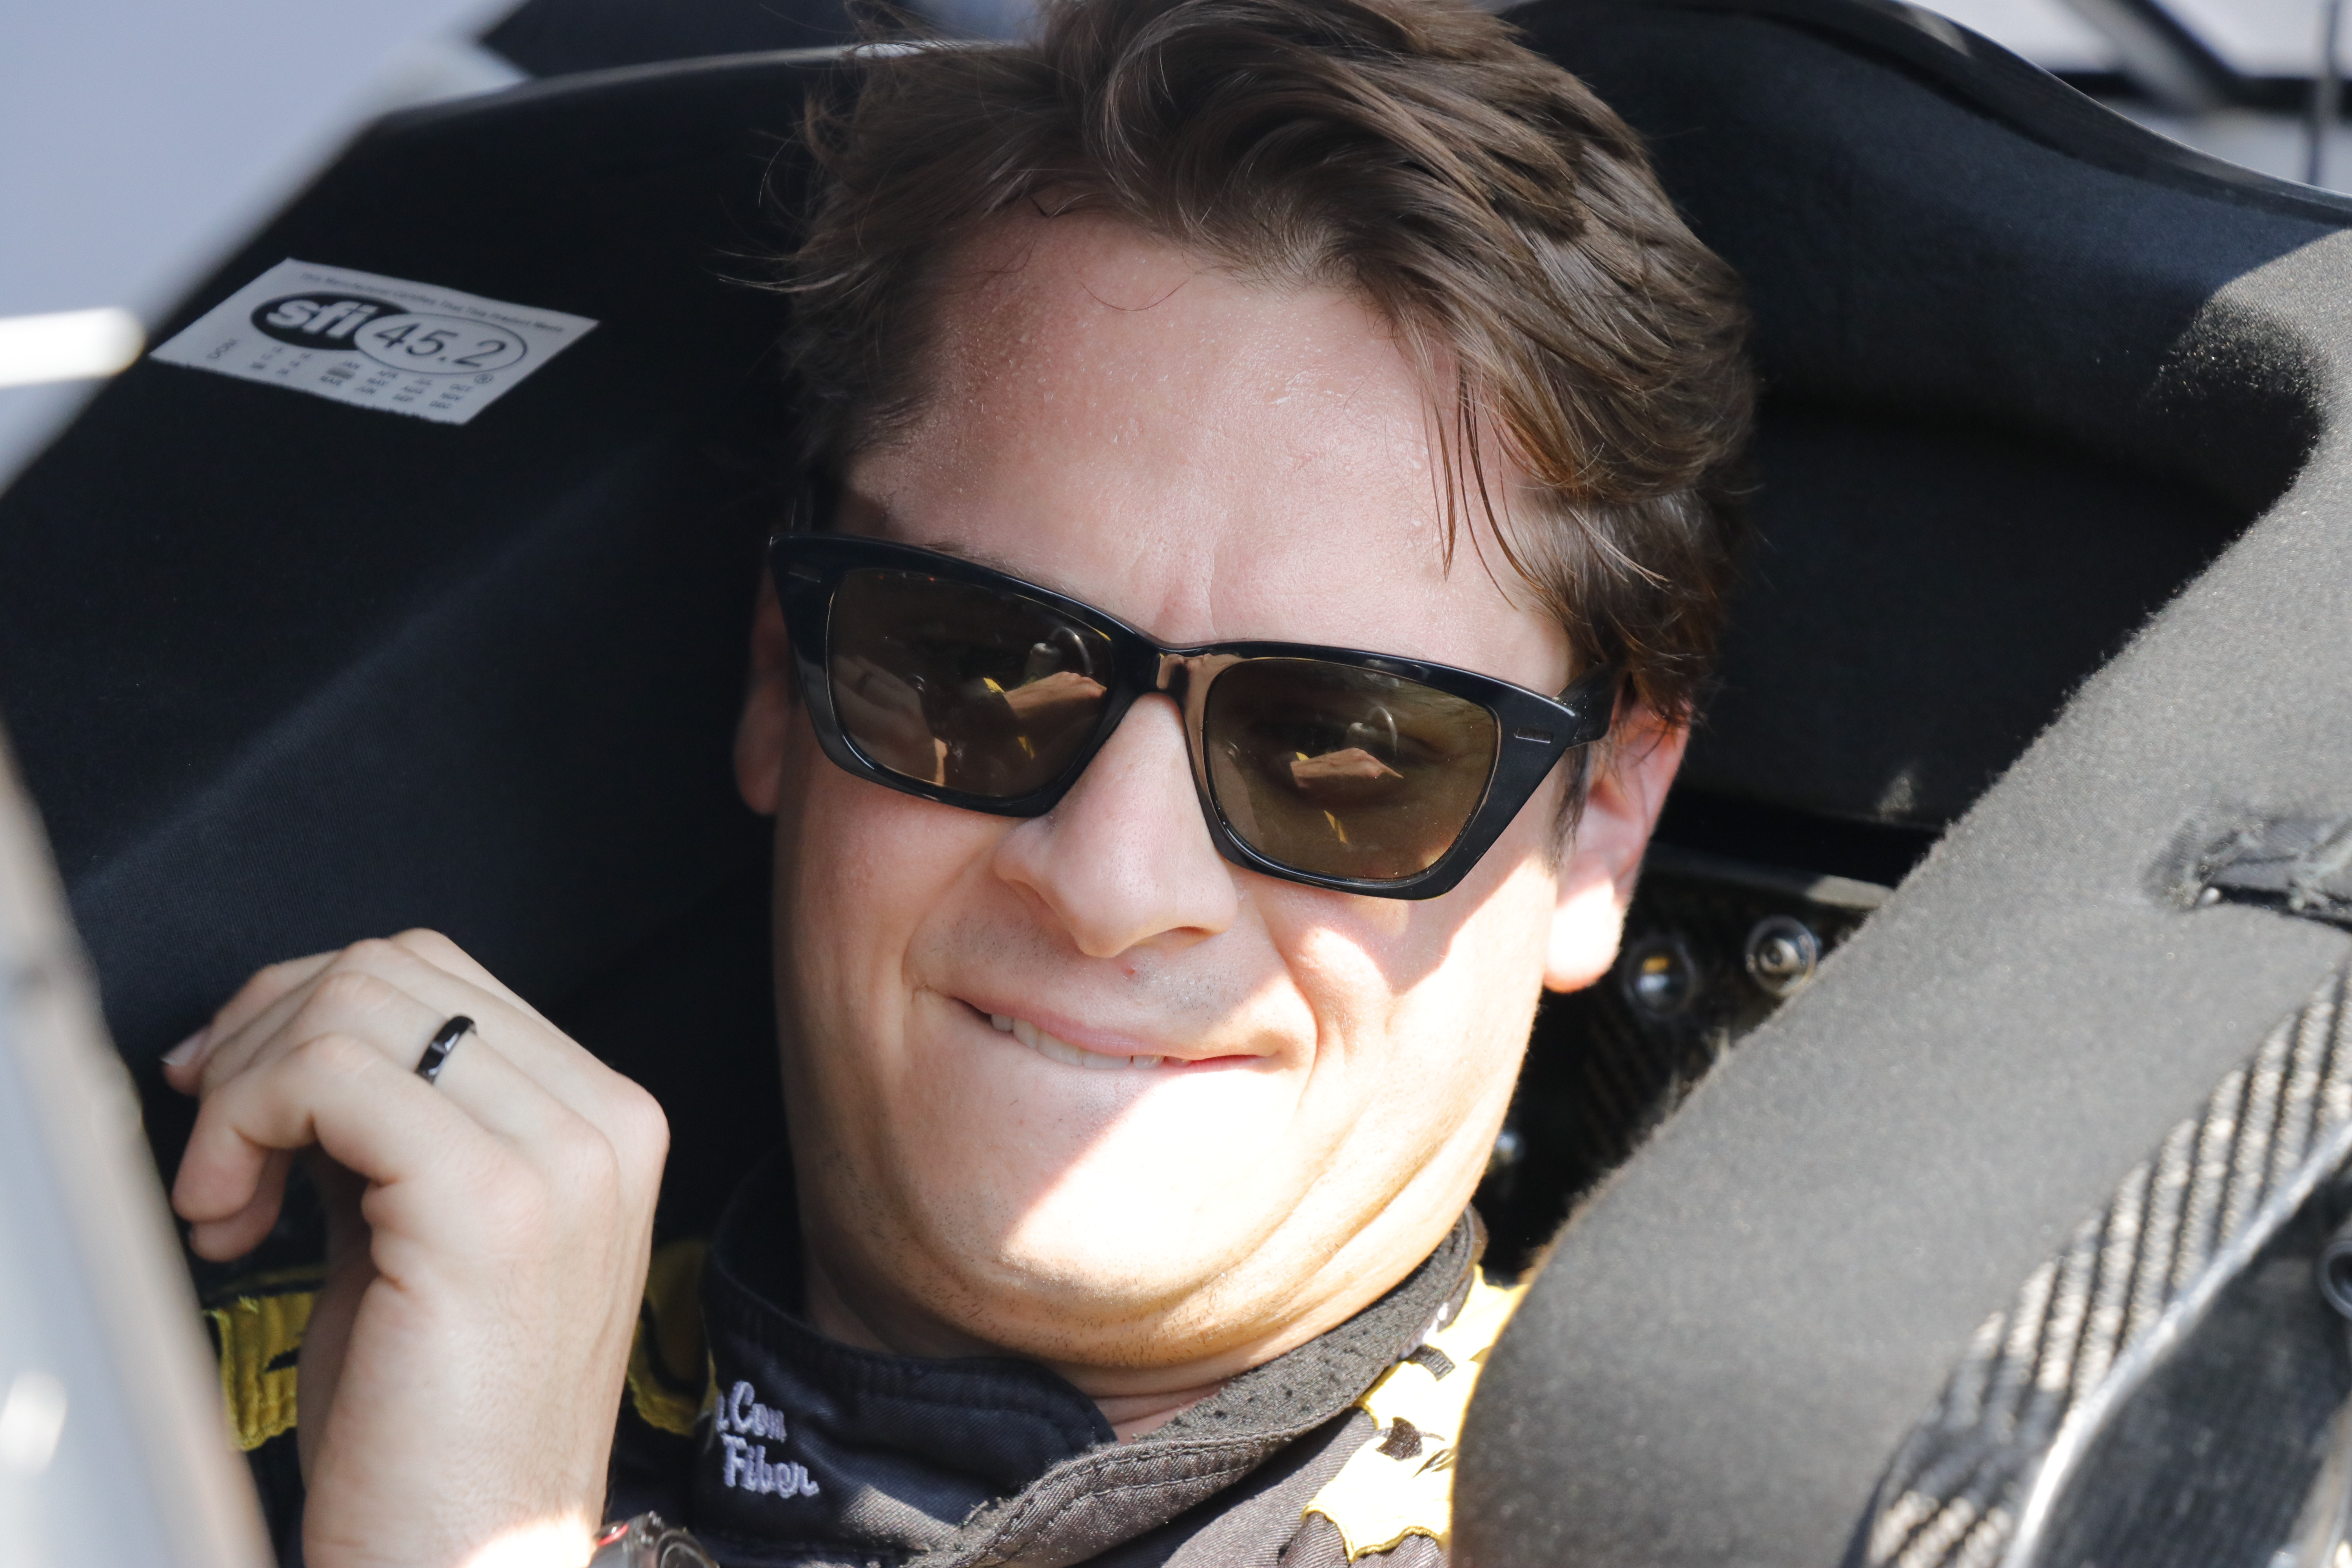 Certainly, Landon Cassill provided candid suggestions for late model racing. (Photo Credit: Stephen Conley/TPF)